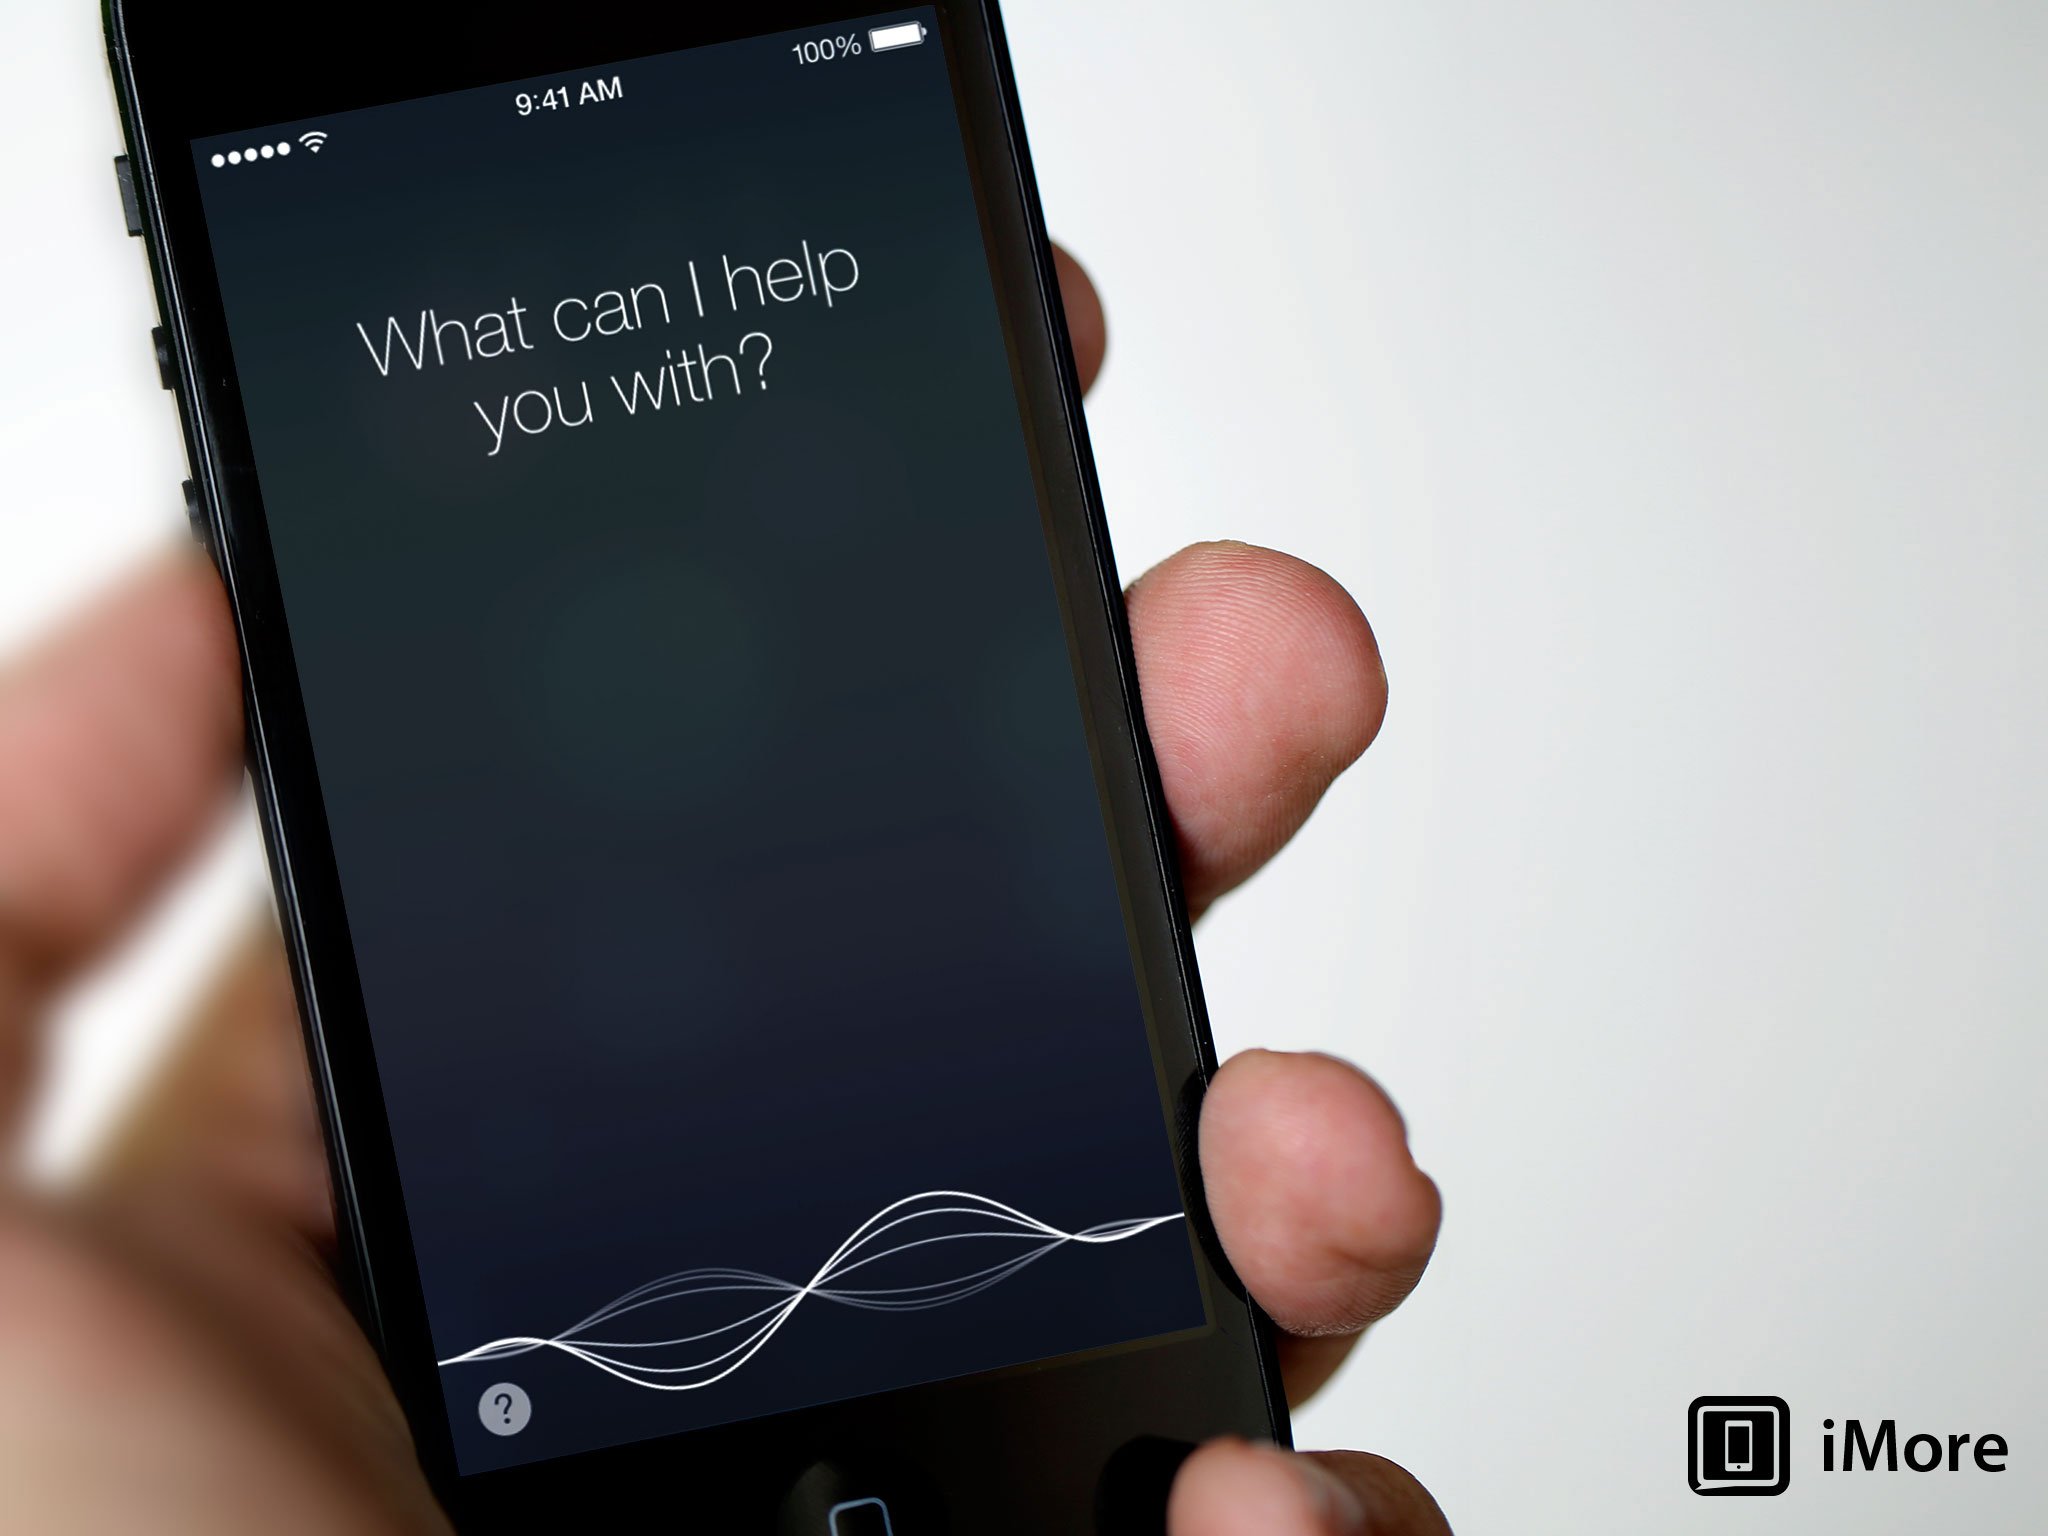 Everything you need to know about iOS 7 Siri: Apple's personal digital assistant gets a new look, new voices, and new connections to Wikipedia, Twitter, Bing, and settings.